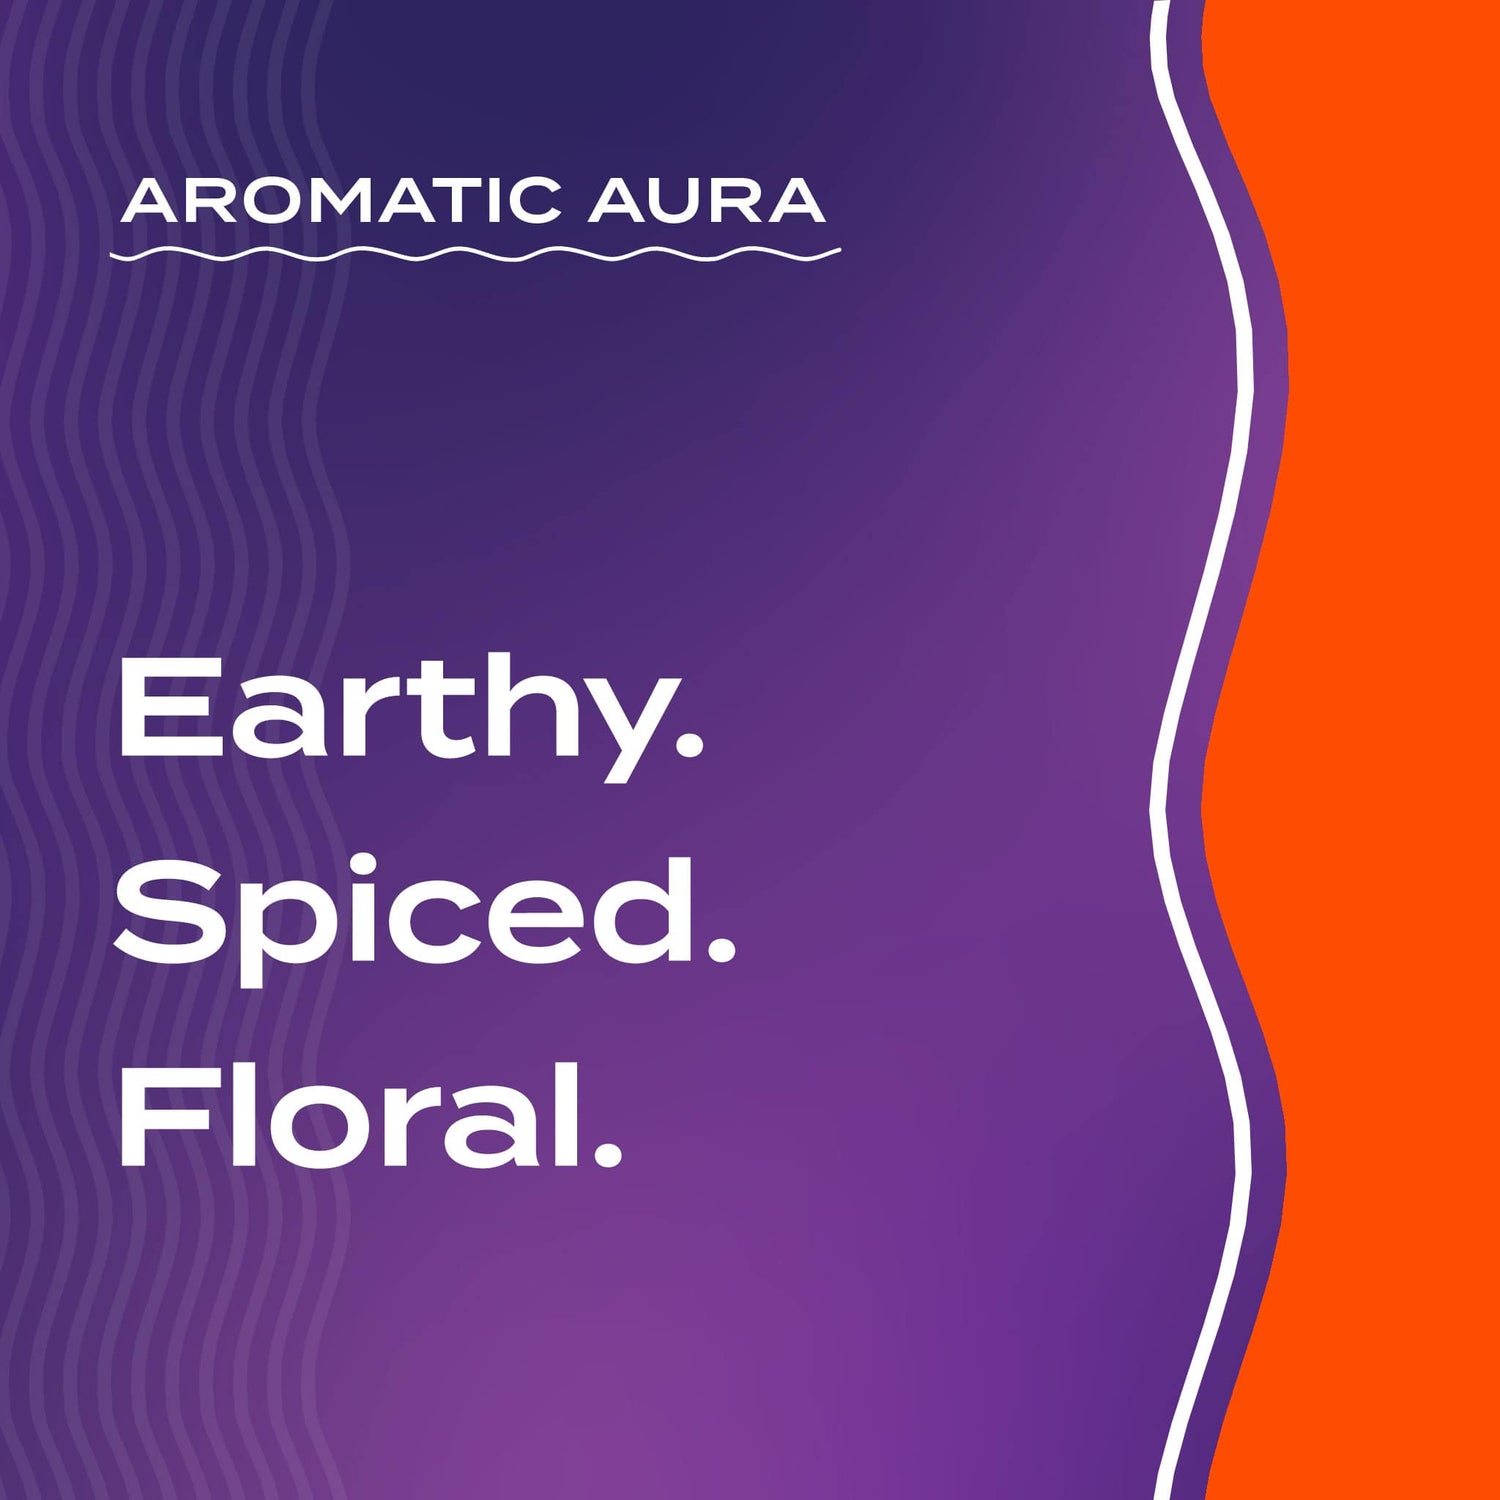 Text graphic depicting the aromatic aroma of Patchouli-Ylang Ylang: Earthy, Spiced, Floral.